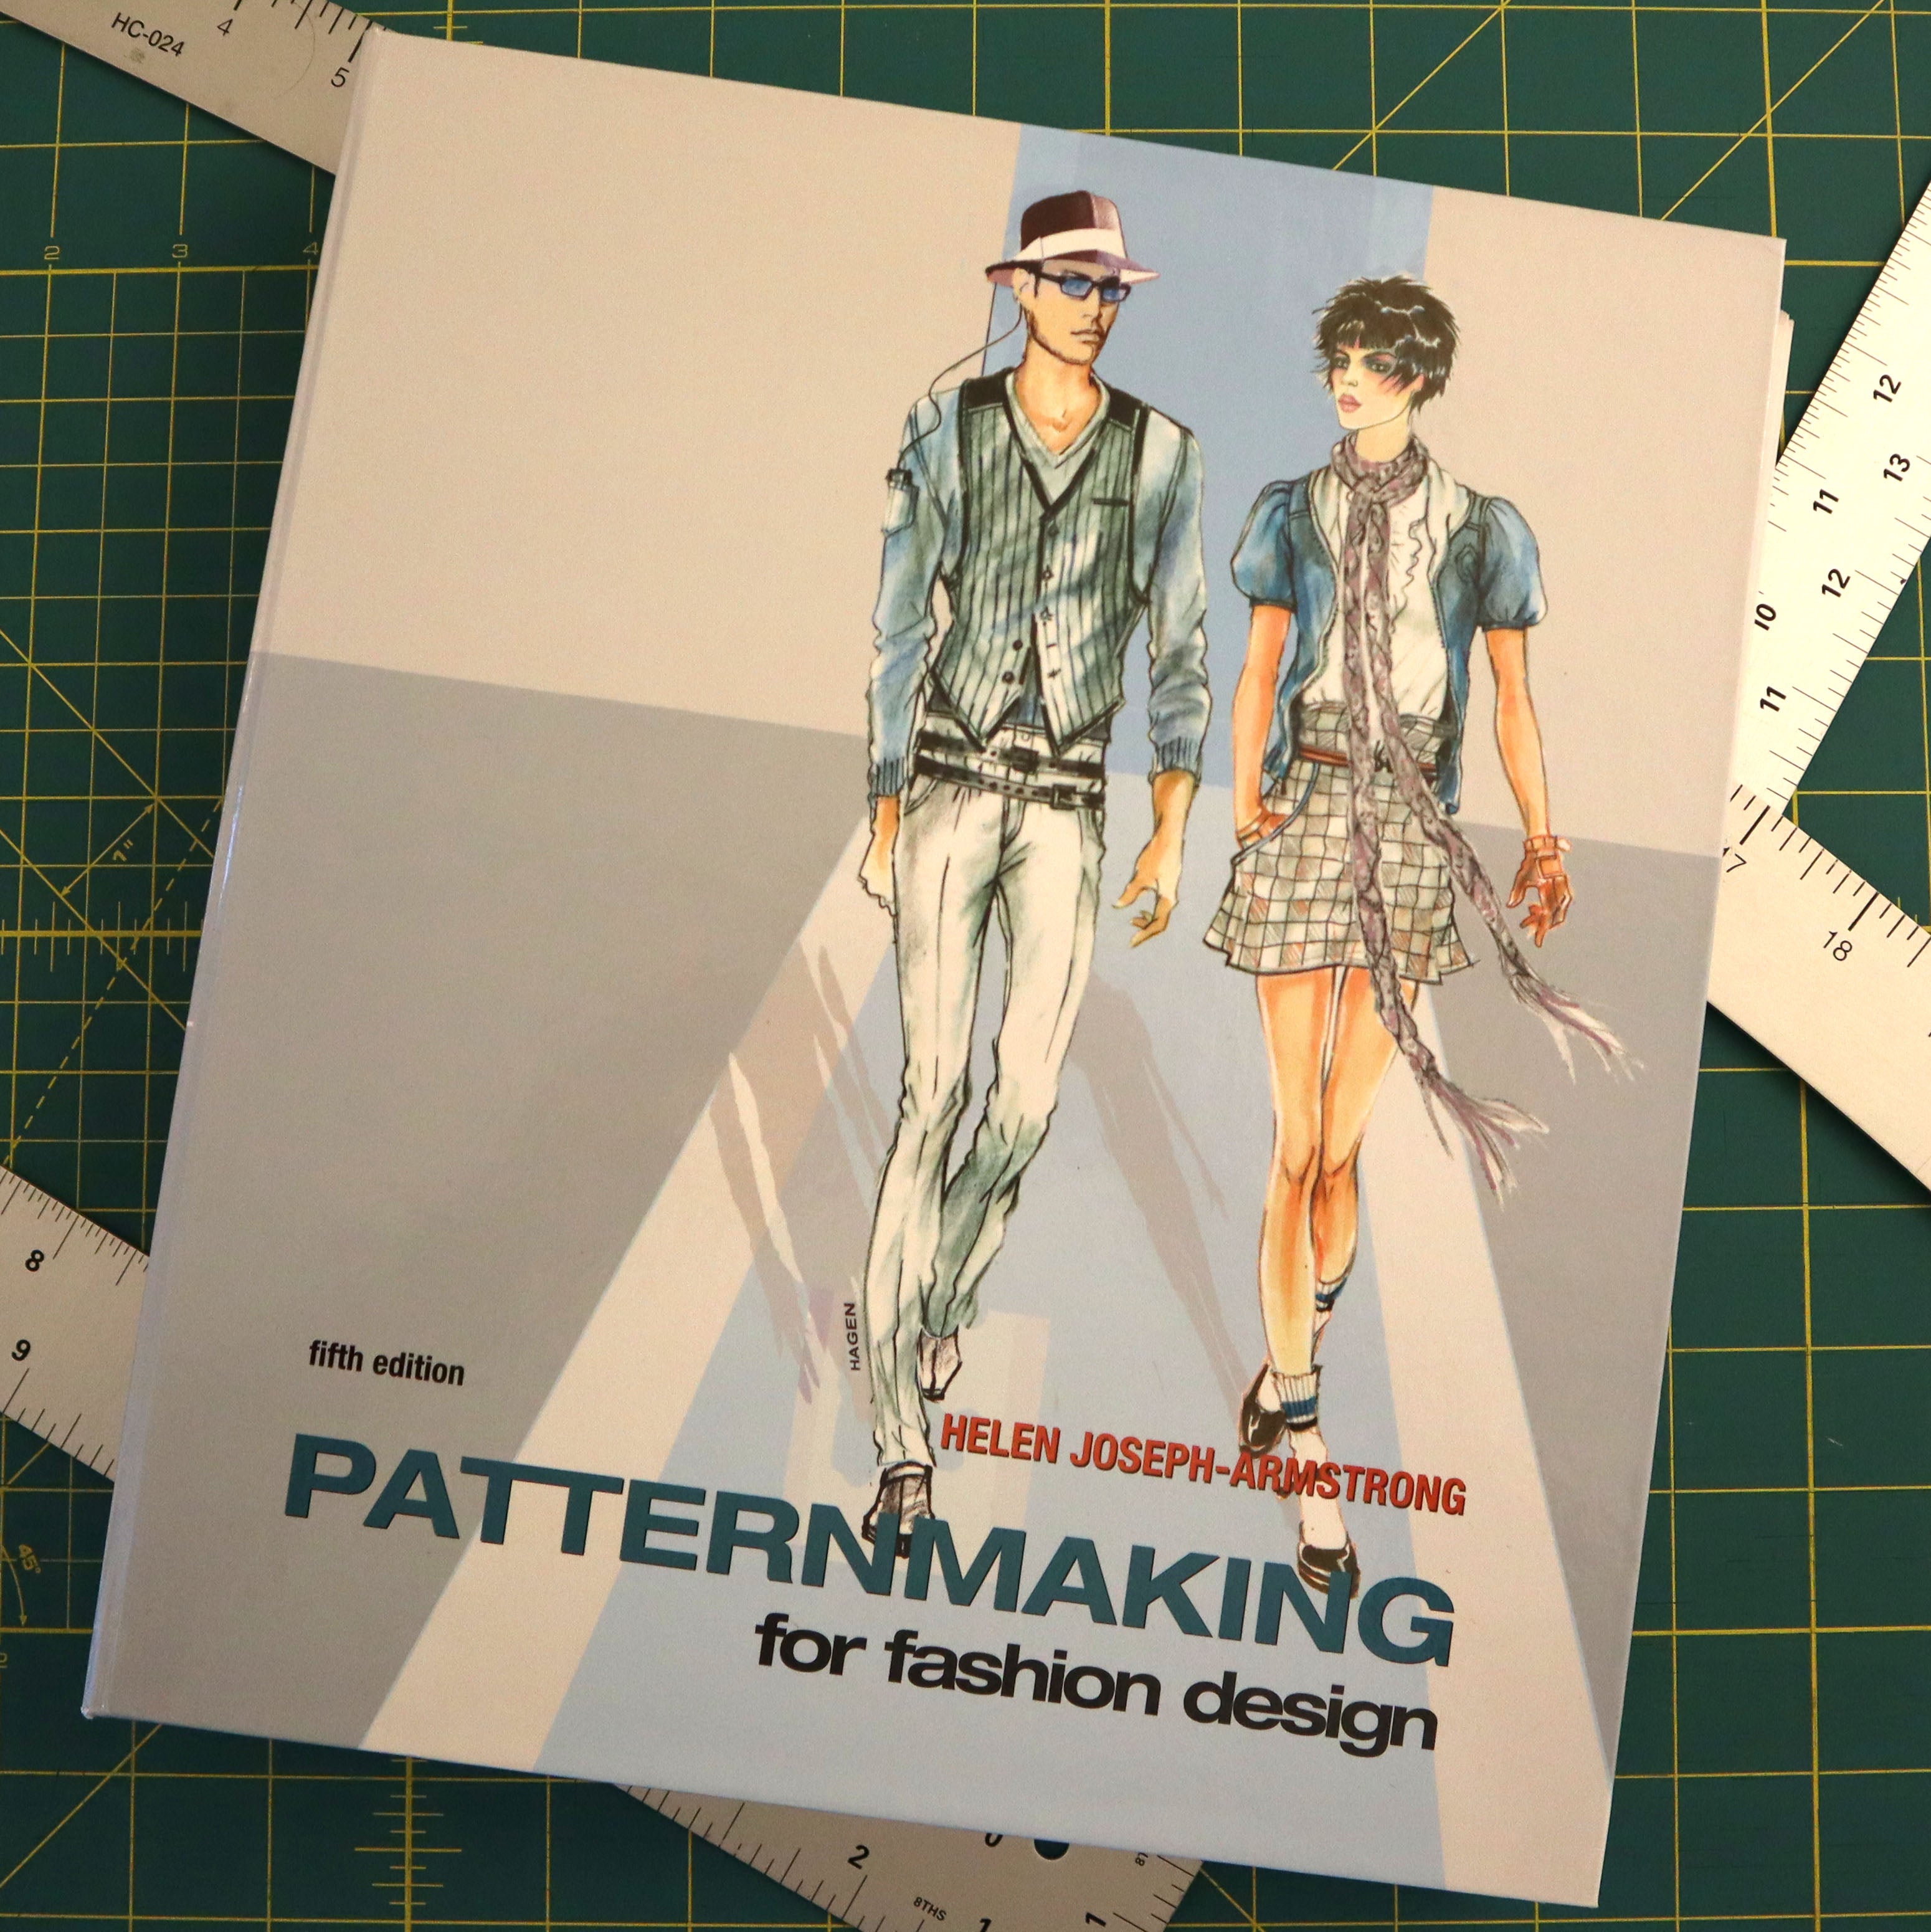 Patternmaking for Fashion Design by Helen Joseph Armstrong 